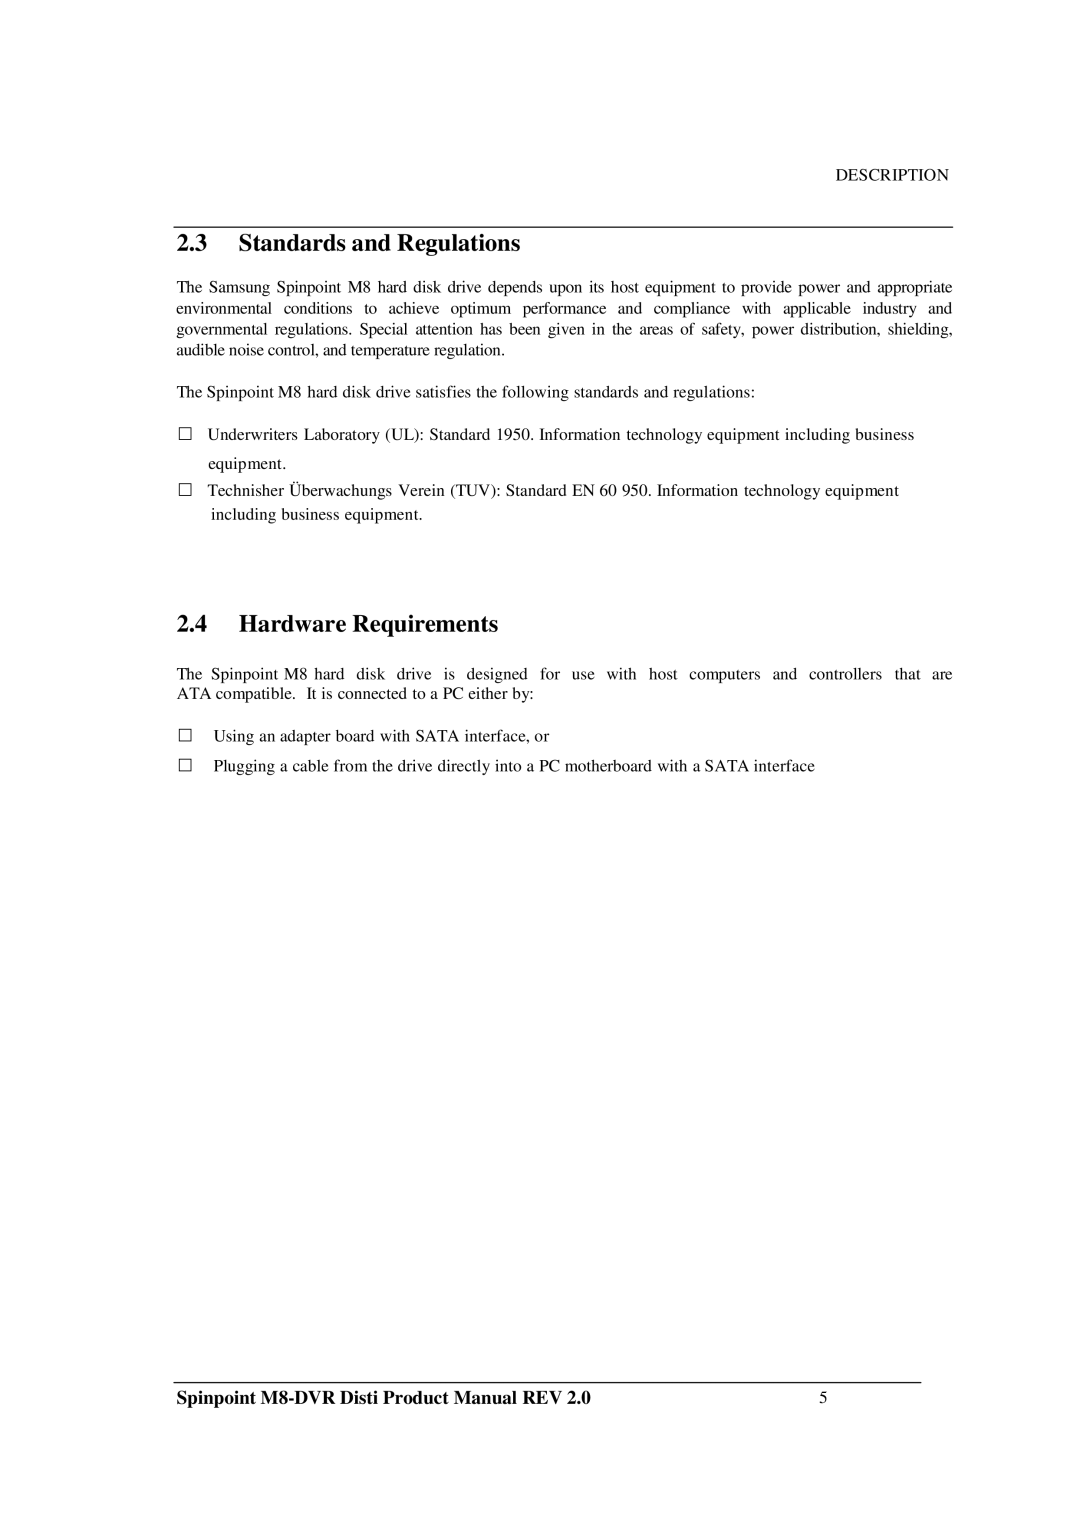 Samsung M8-DVR manual Standards and Regulations, Hardware Requirements 